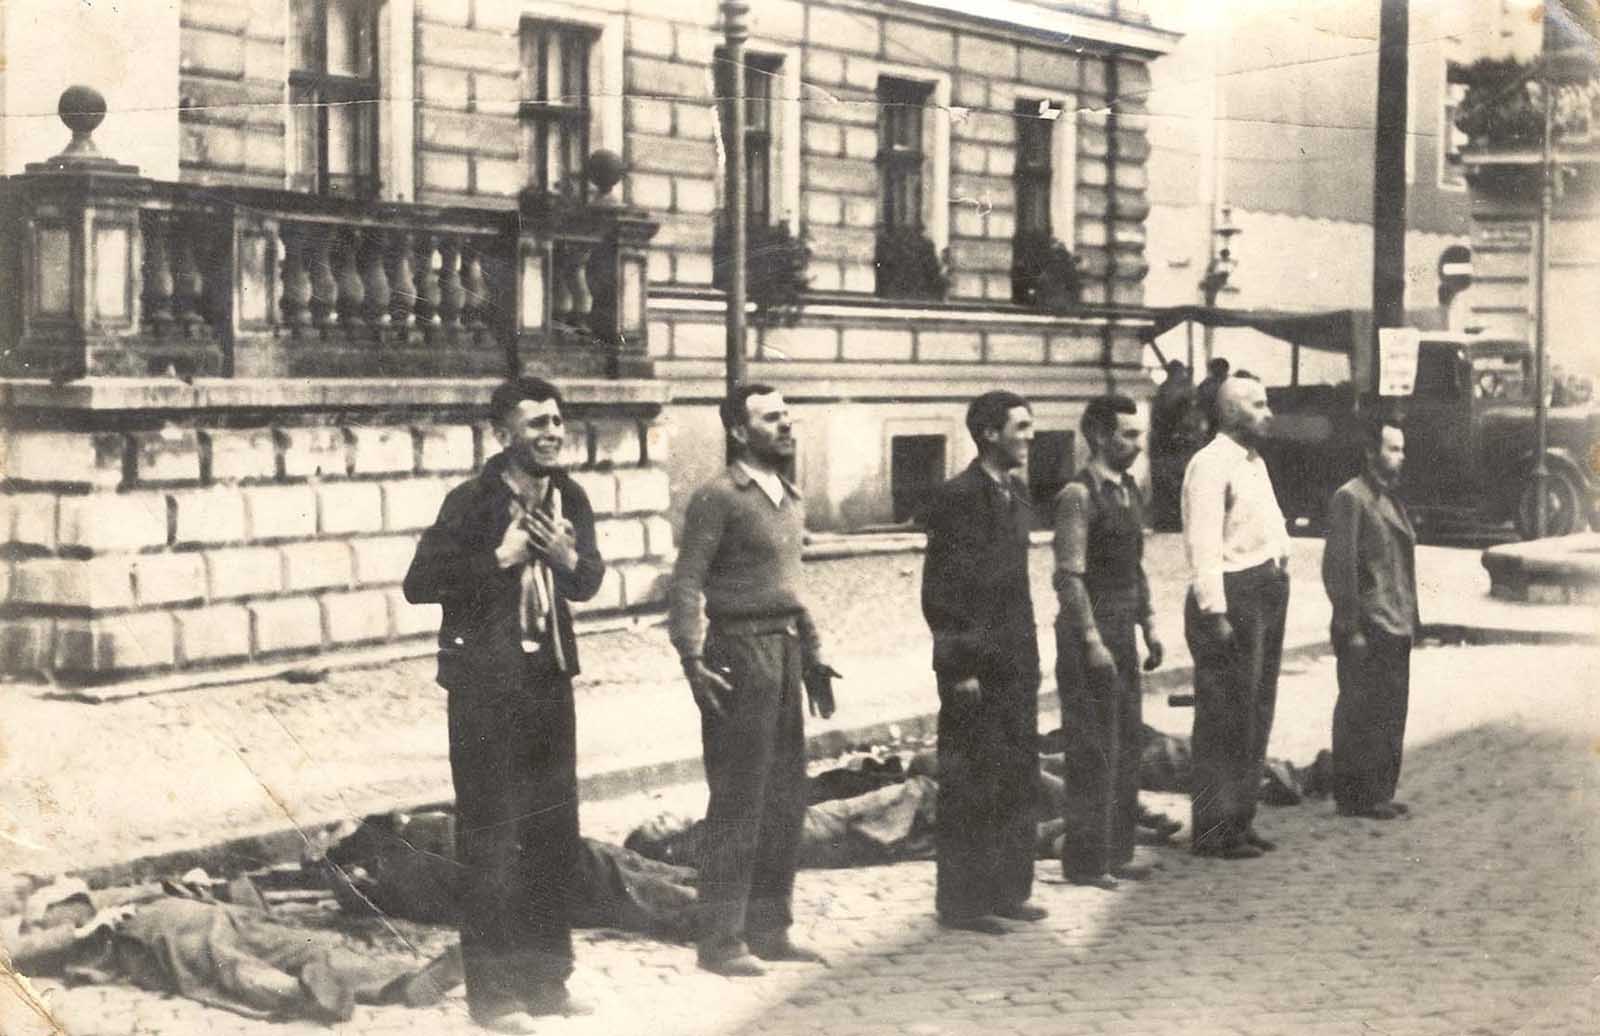 Facing the Death: Poles shot by Germans in Bydgoszcz, 9 September 1939.